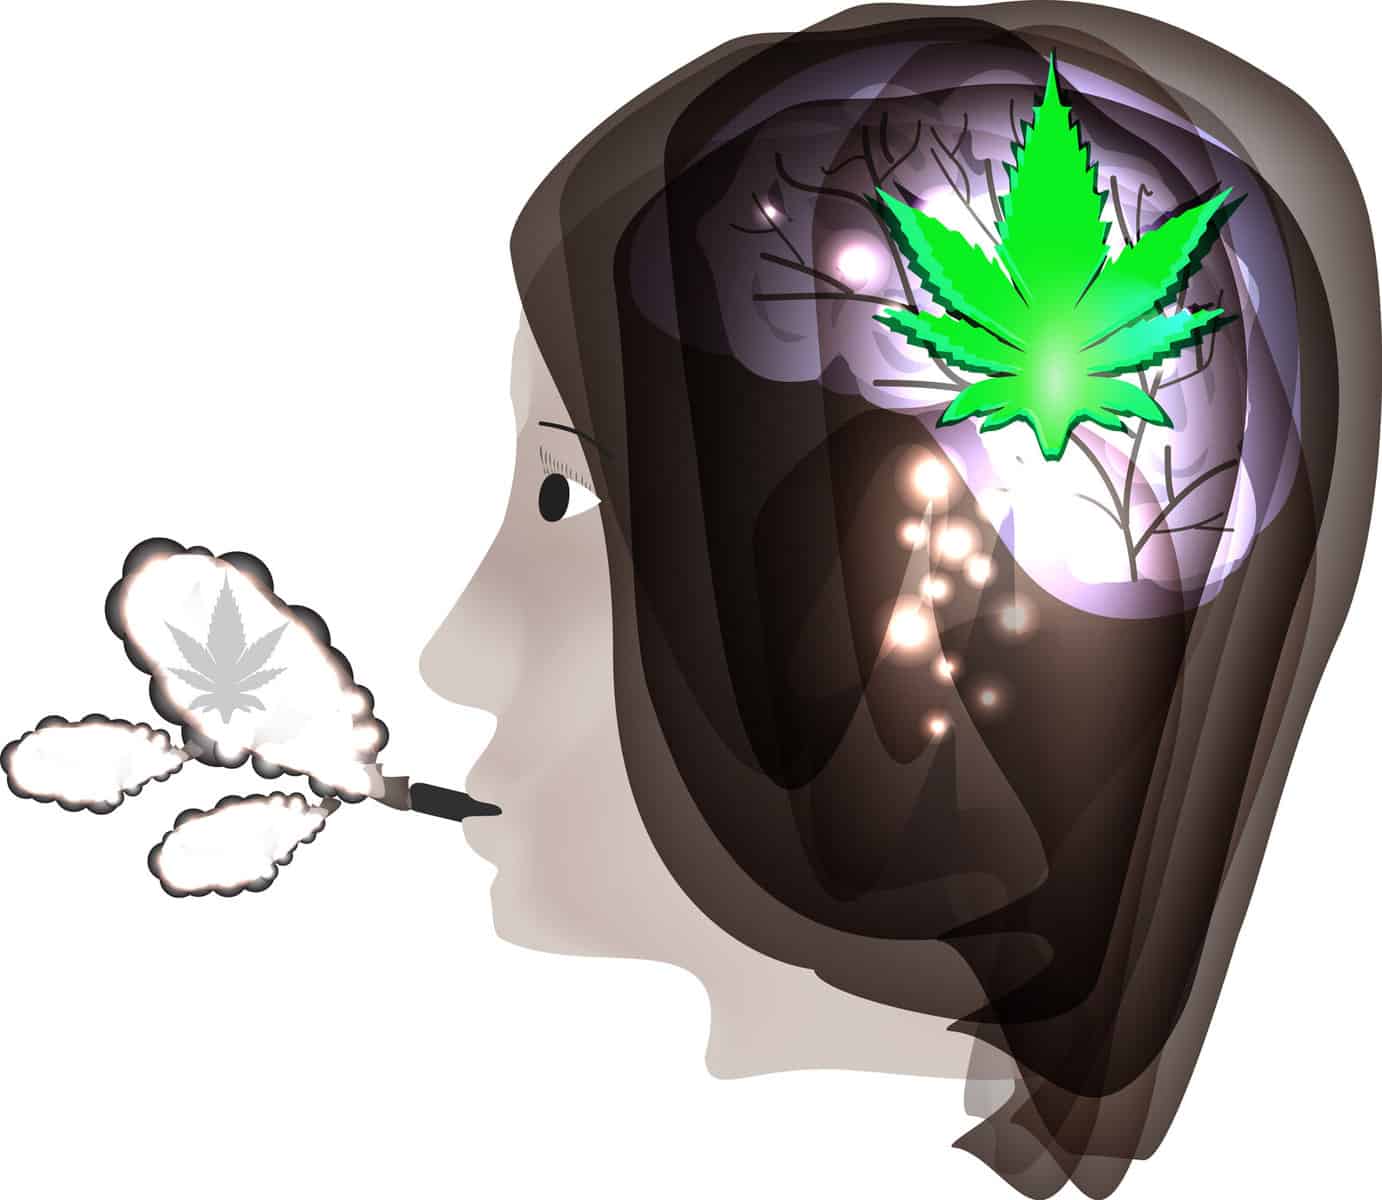 Does weed kill brain cells?